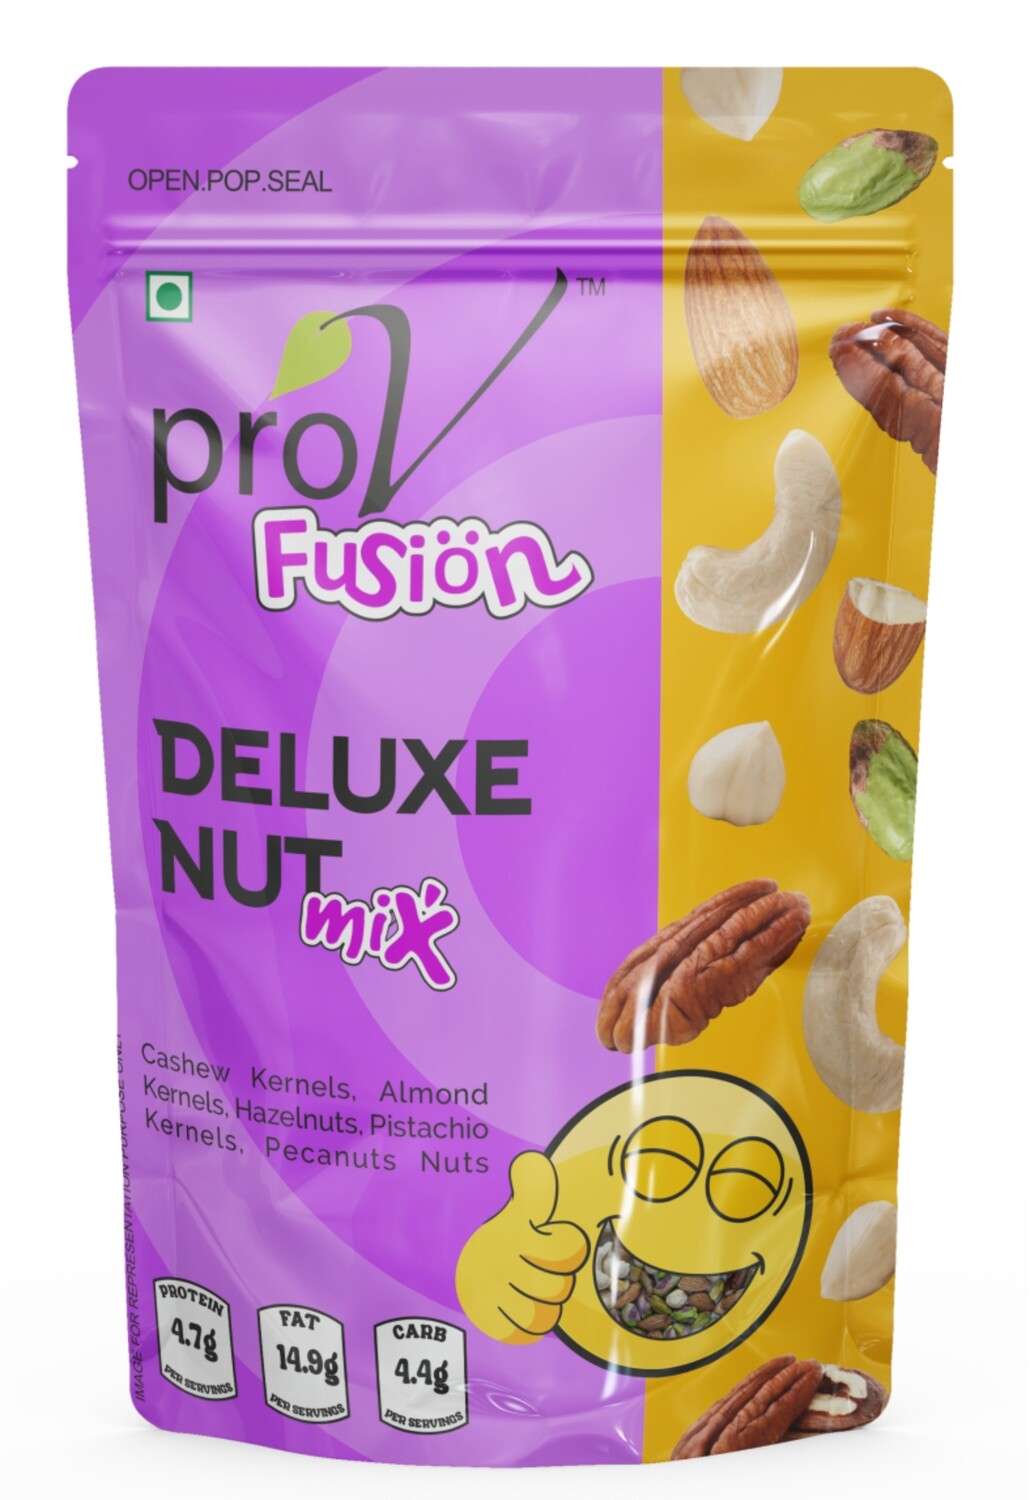 ProV Fusion - Deluxe Nut Mix 200gms